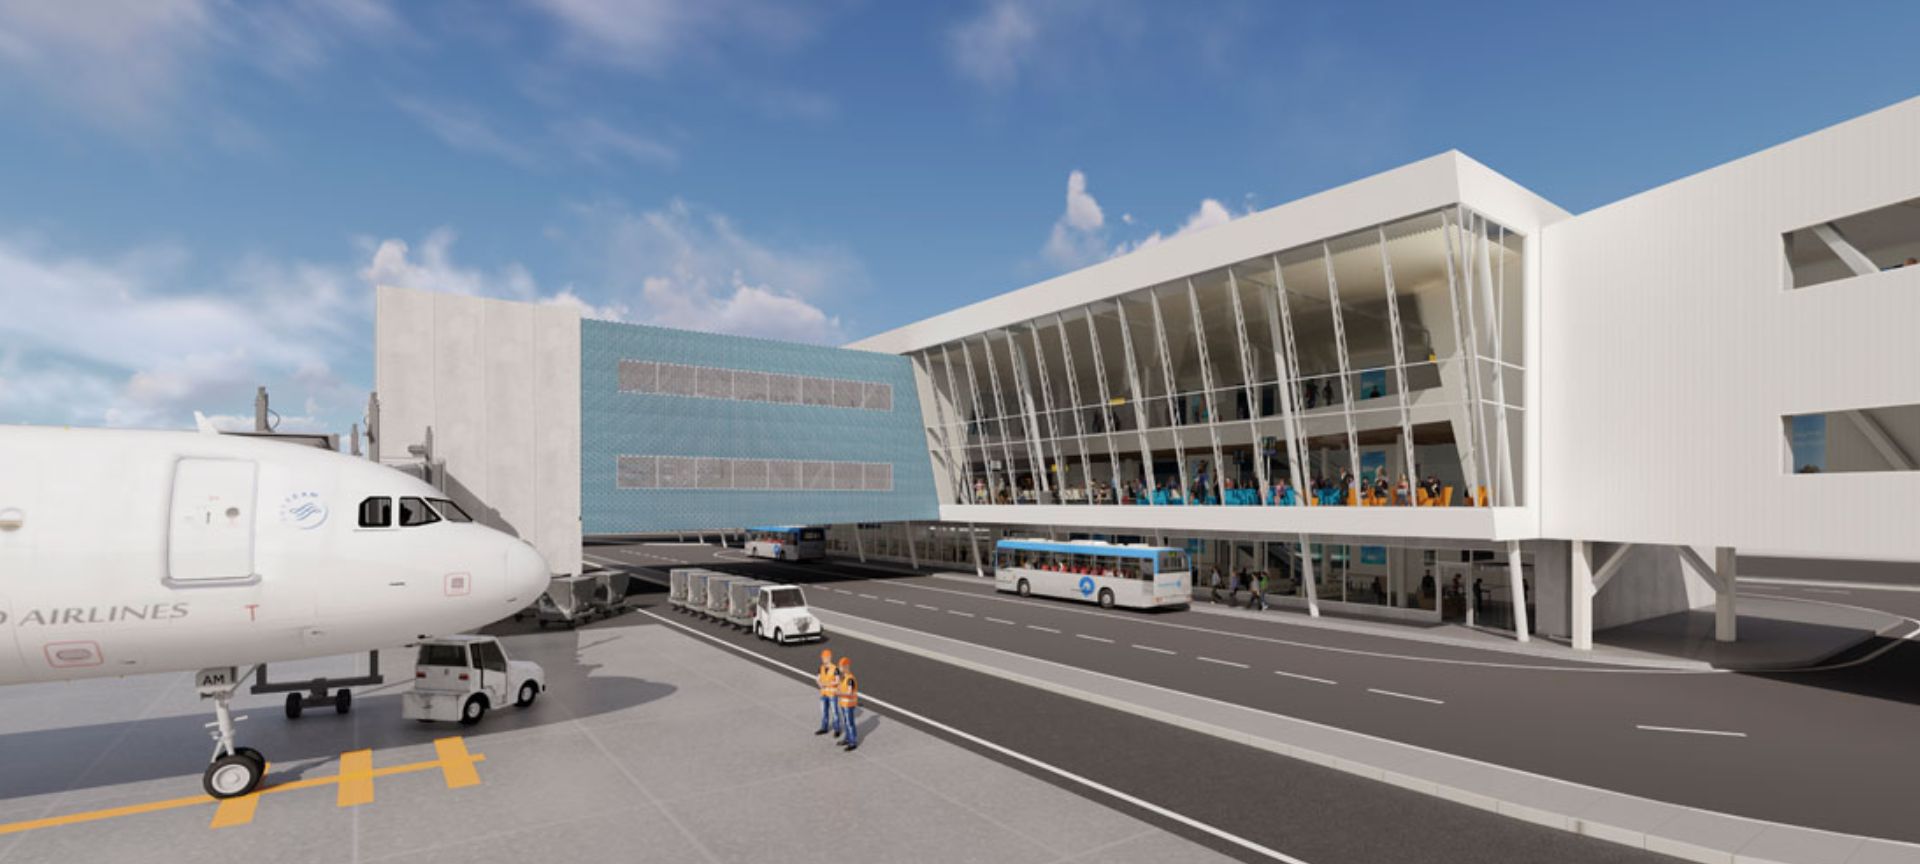 Aruba airport upgrade improves capacity, structural safety and sustainability l Royal haskoningDHV